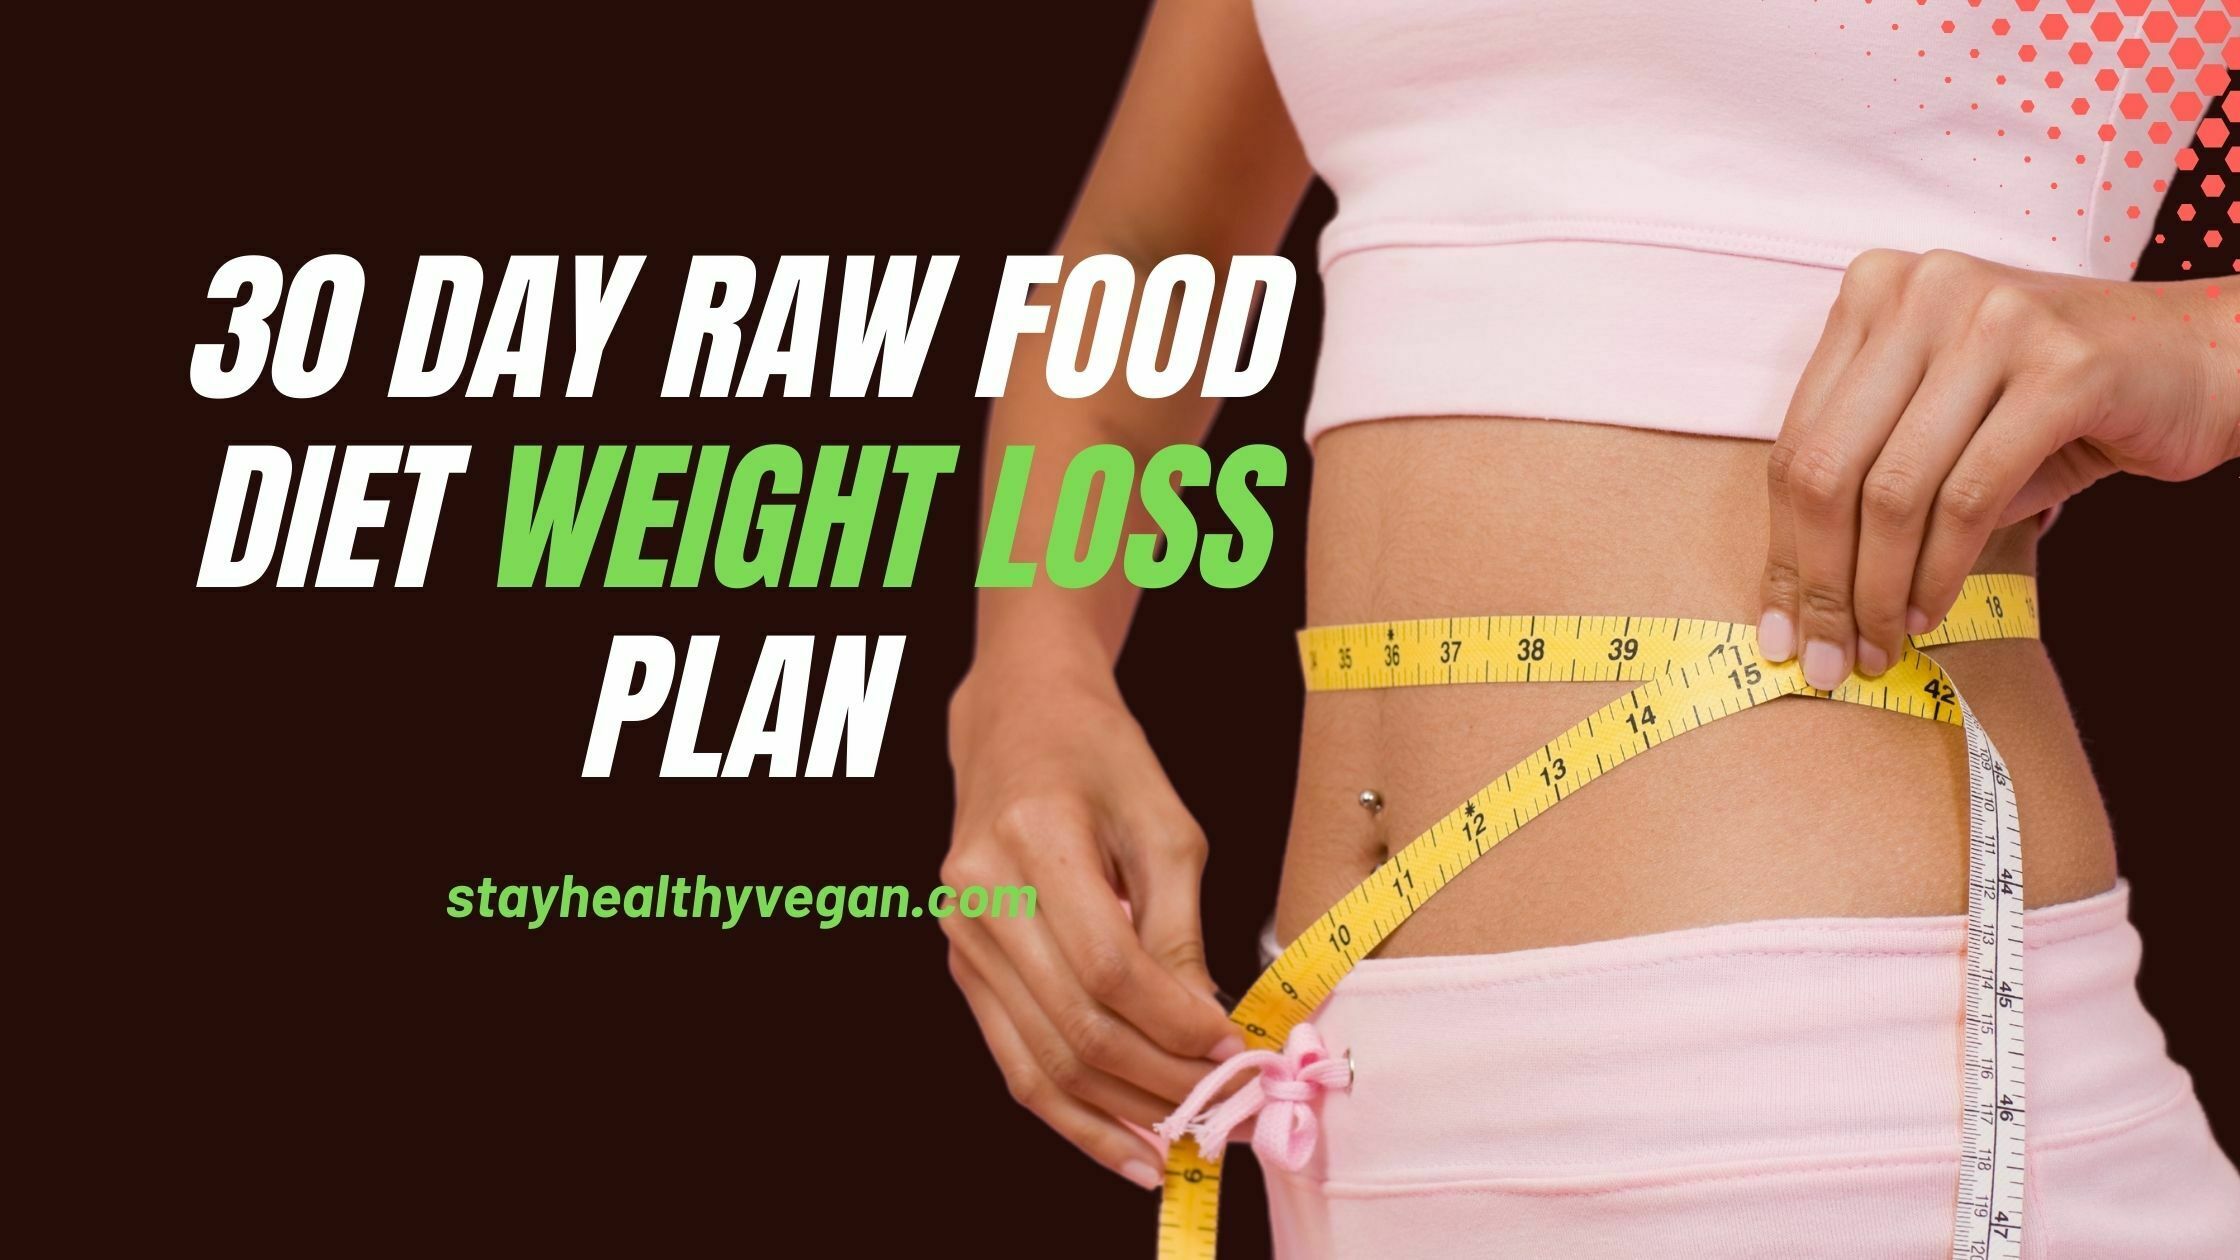 30 Day Raw Food Diet Weight Loss